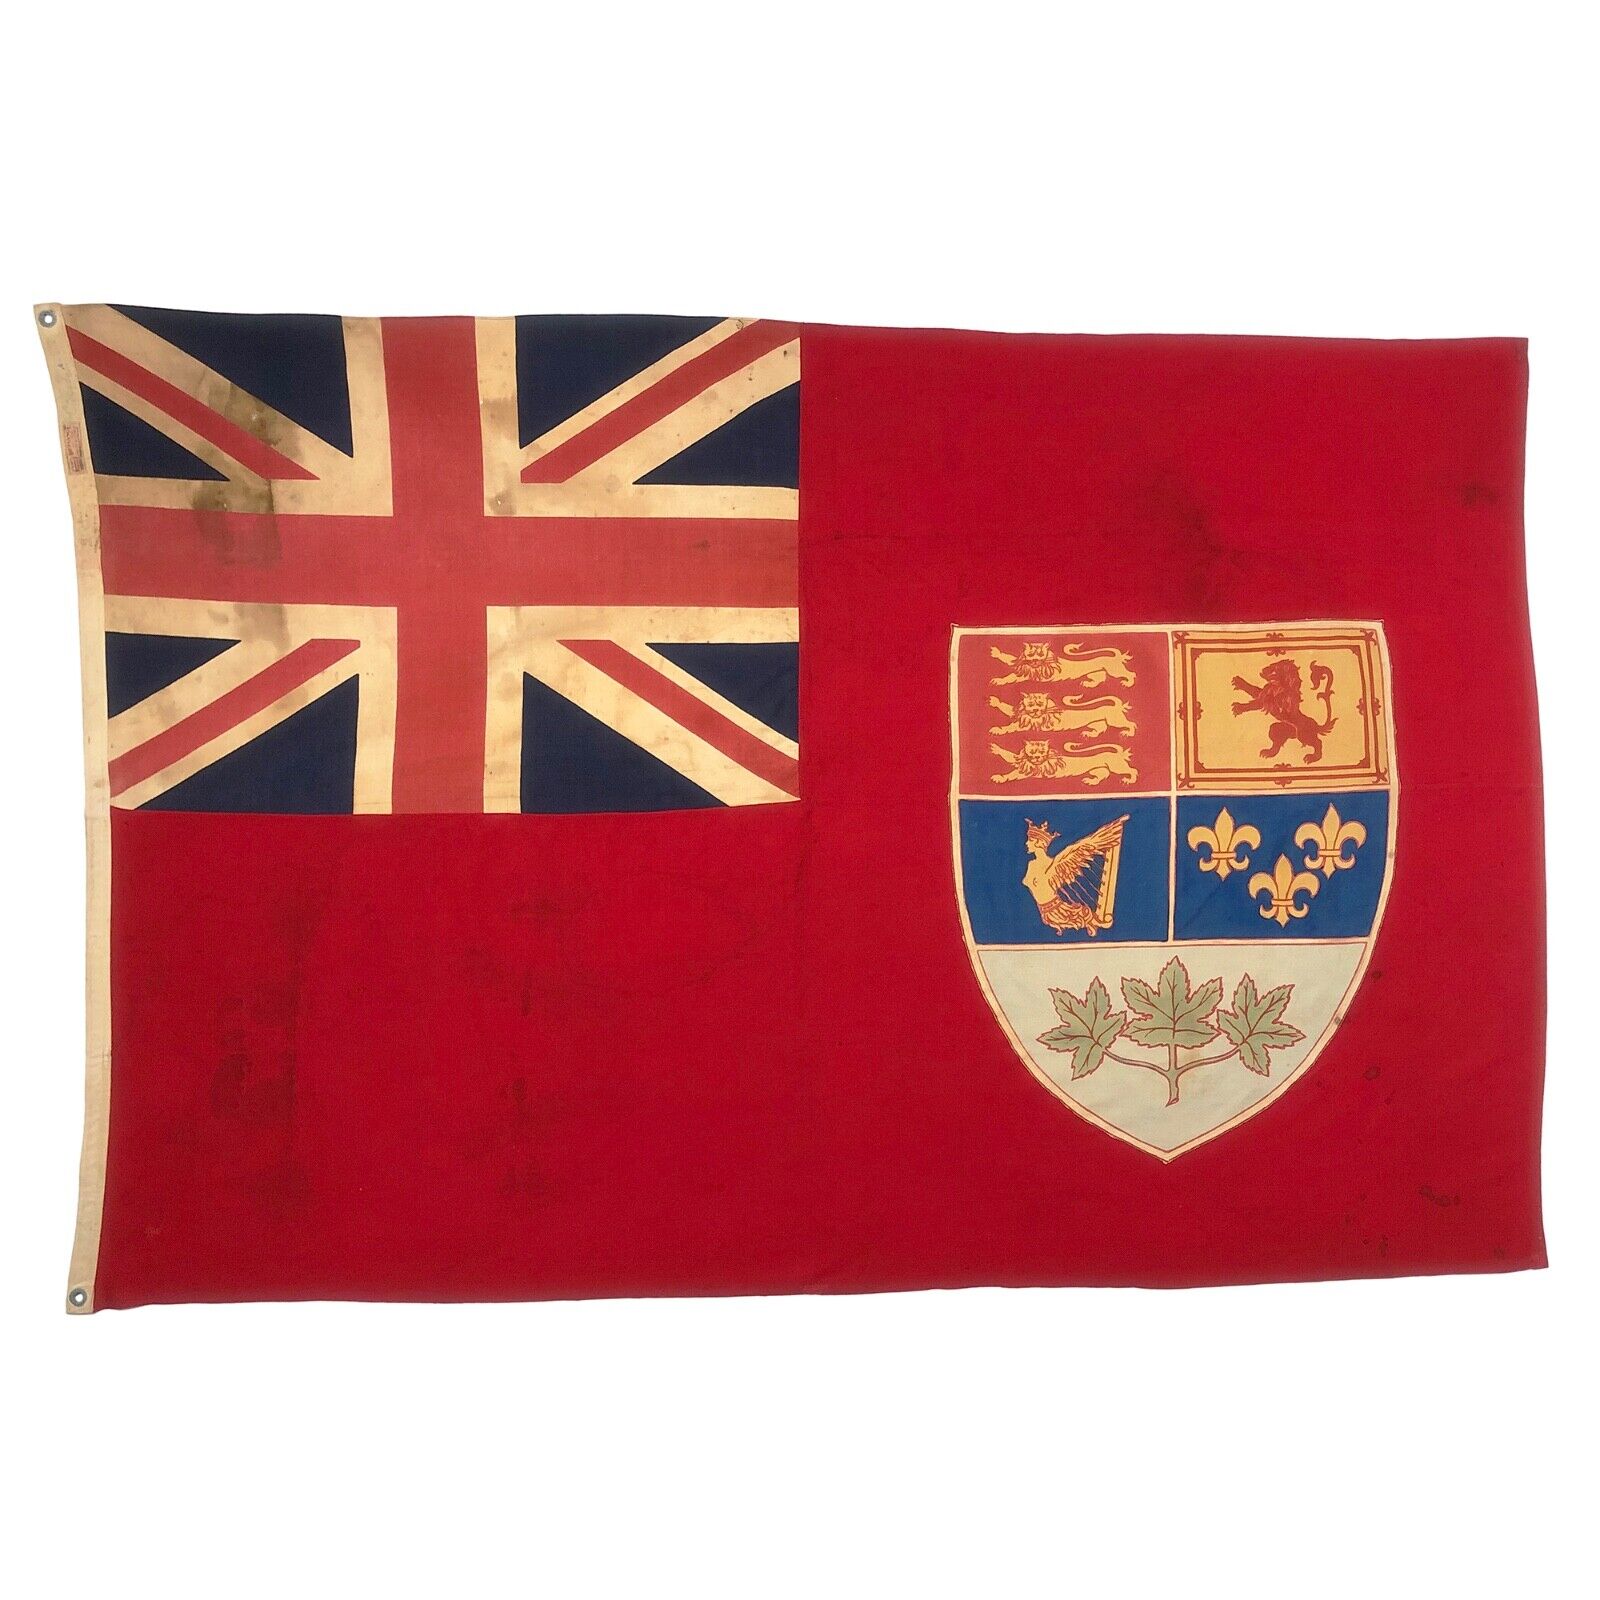 Vintage Cotton Canada Red Ensign Flag Cloth Old Canadian Union Jack Mid Century